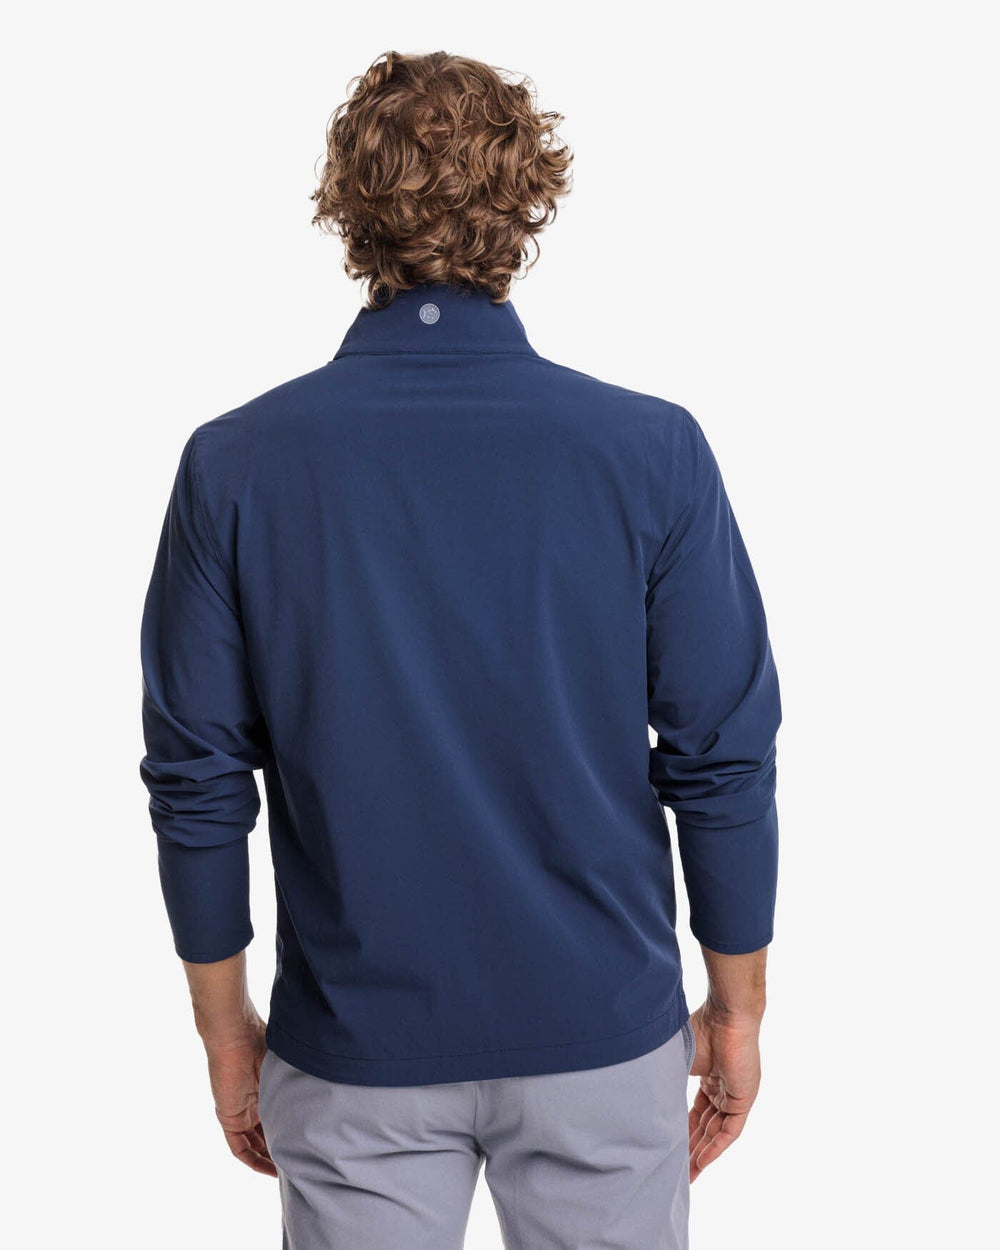 The back view of the Southern Tide Bowline Performance Jacket by Southern Tide - Dress Blue